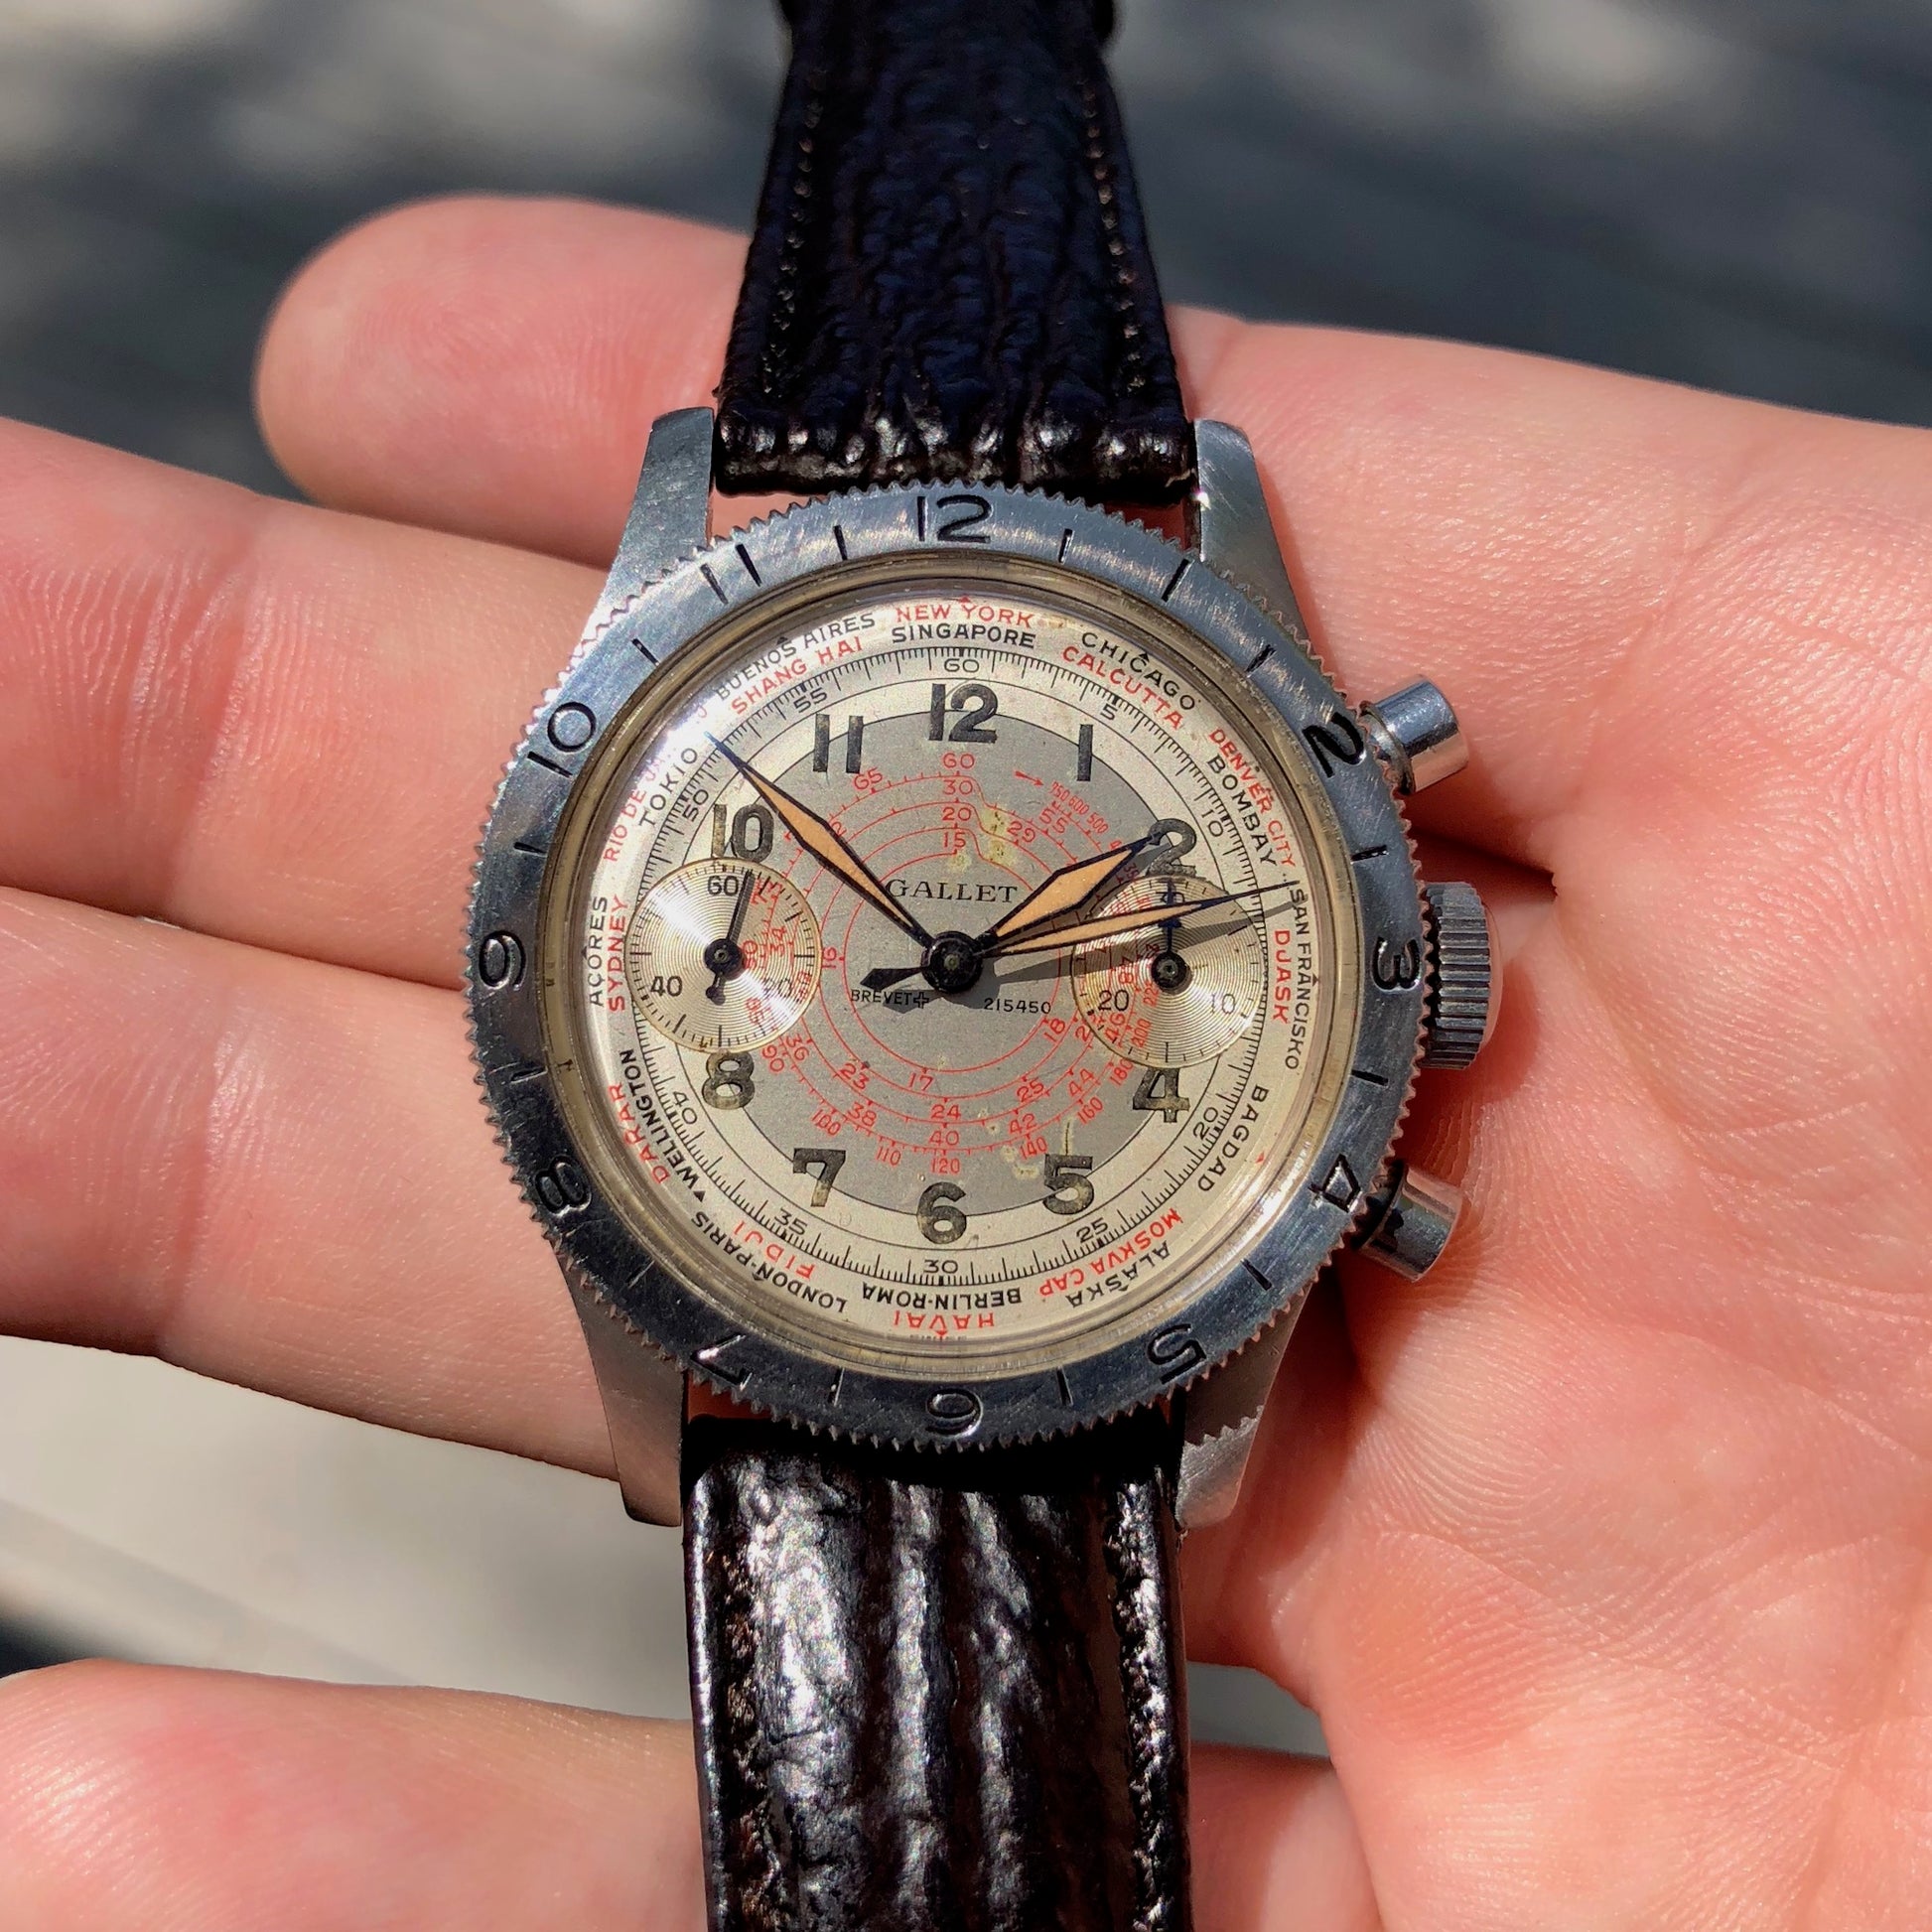 Vintage Gallet Flying Officer Clamshell Chronograph Stainless Steel 1st Gen Wristwatch - Hashtag Watch Company